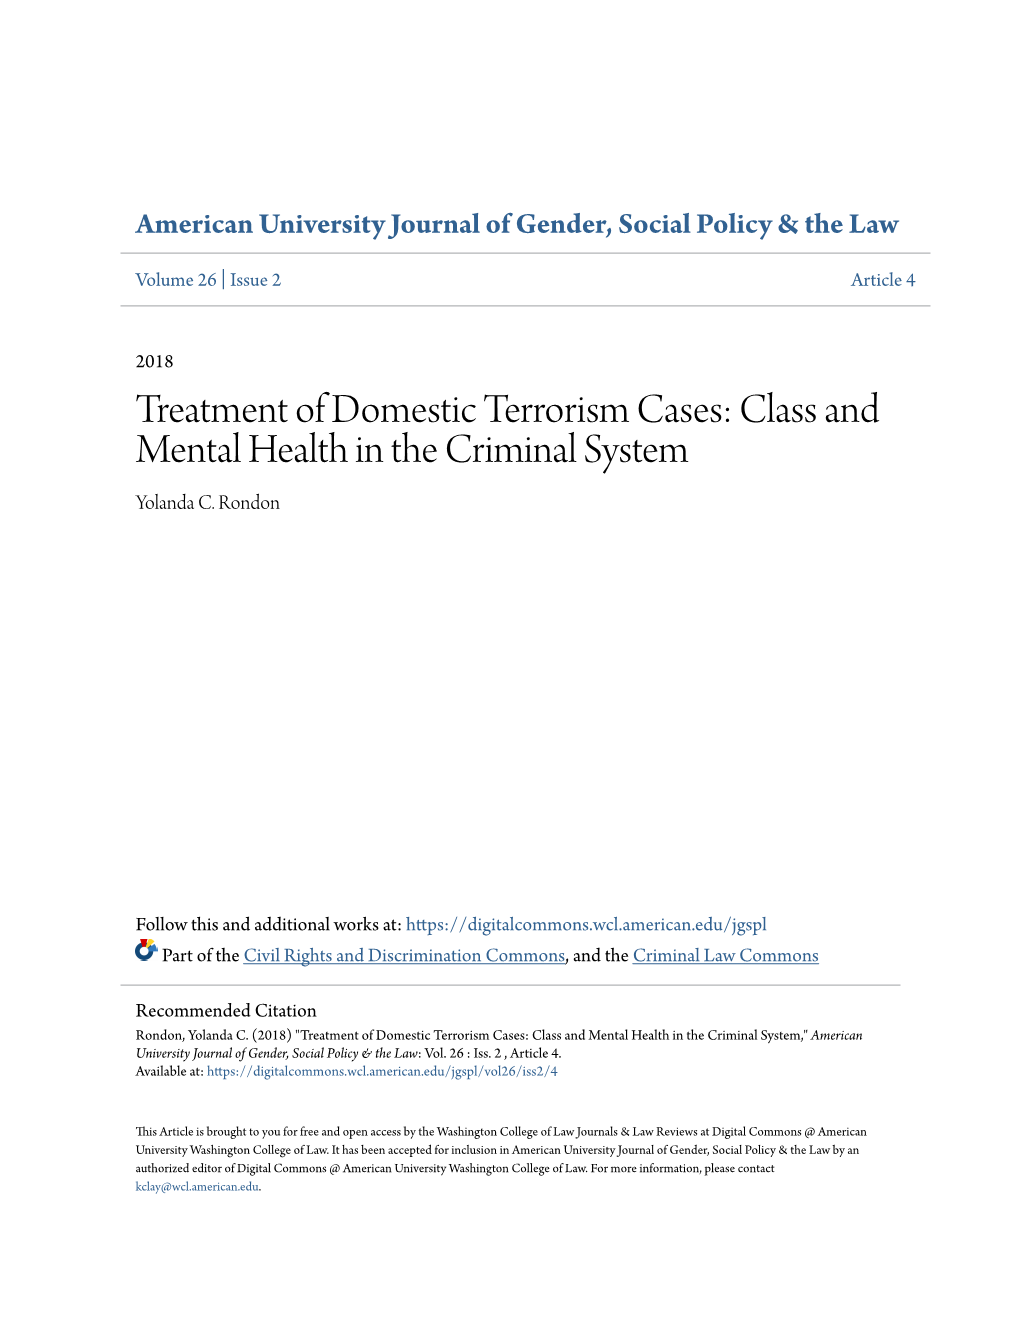 Treatment of Domestic Terrorism Cases: Class and Mental Health in the Criminal System Yolanda C